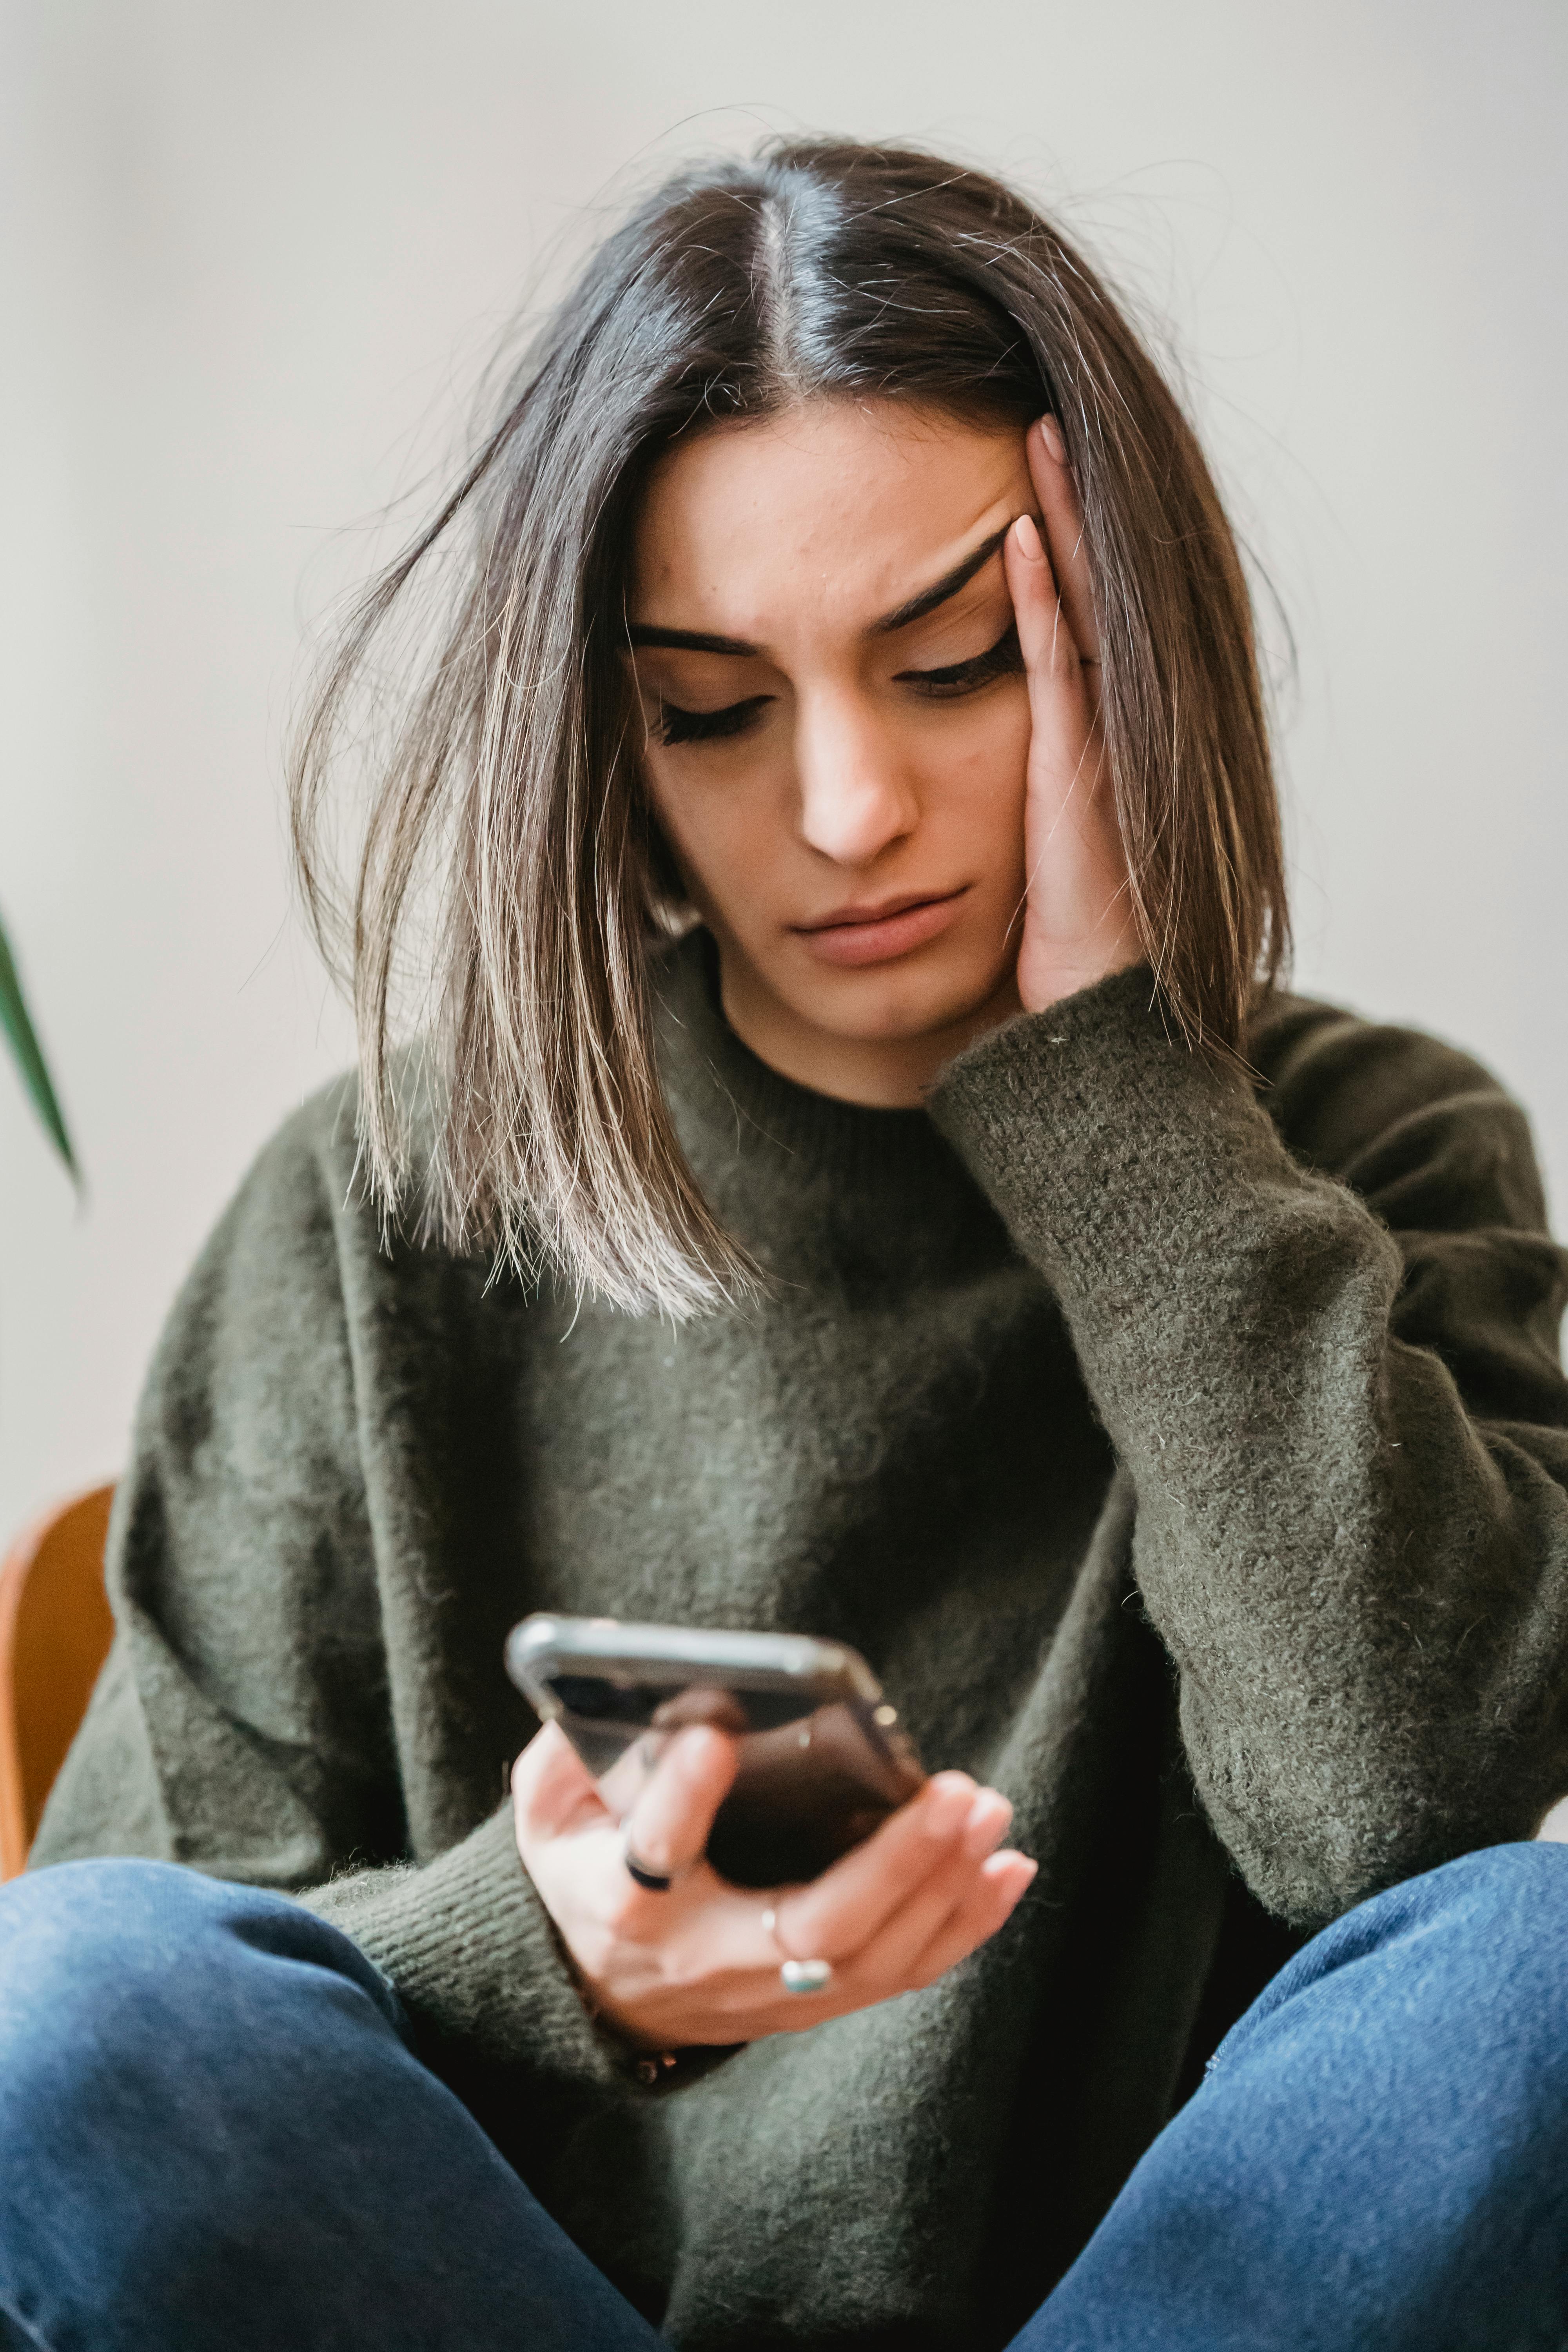 An upset woman looking at something on her phone | Source: Pexels